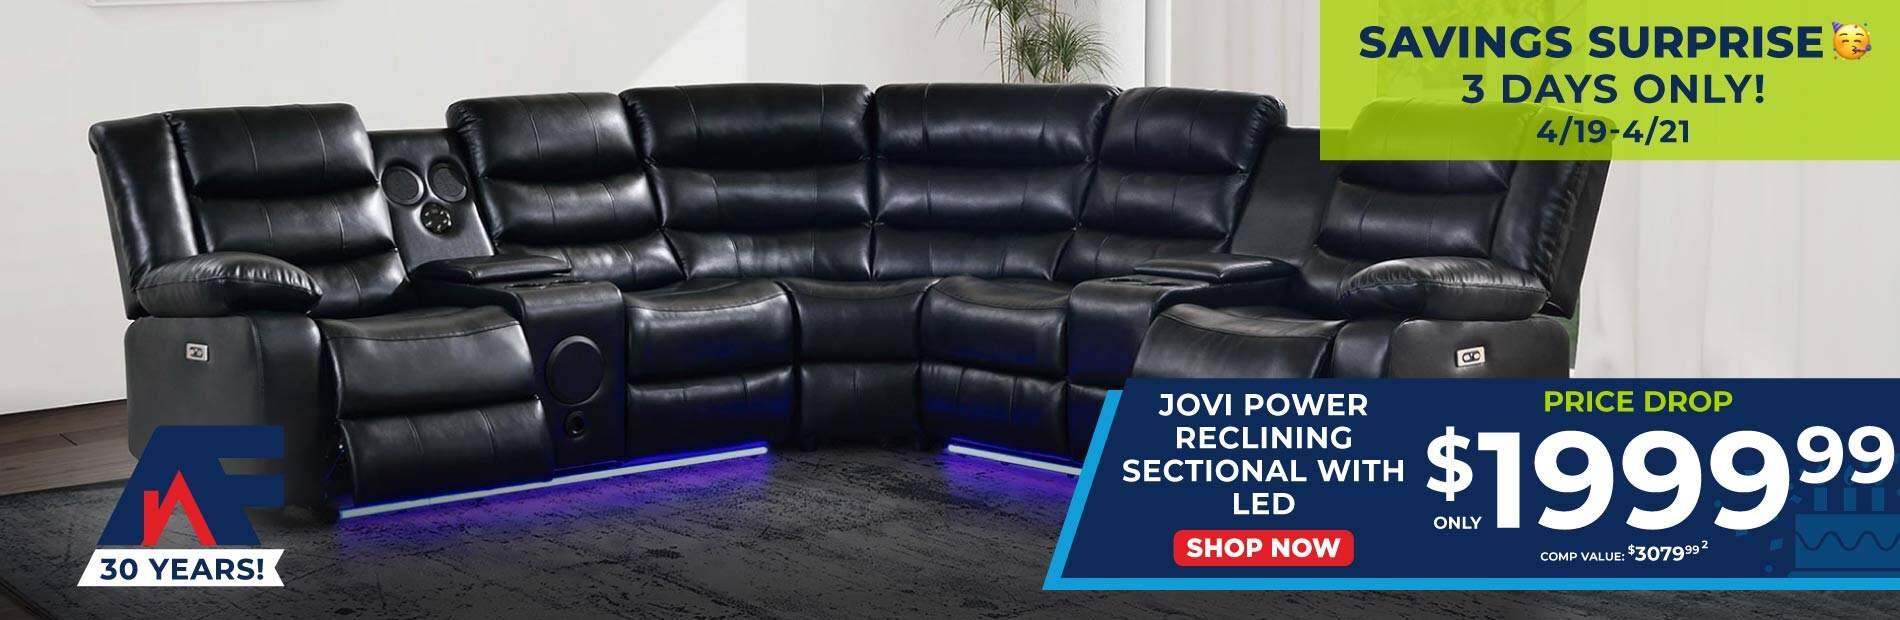 AF 30 Years! Surprise Savings. 3 Days only! 4/19-4/21. Jovi Reclining Sectional with LED. Price Drop only $1999.99. Comp value 3079.99. Shop now.